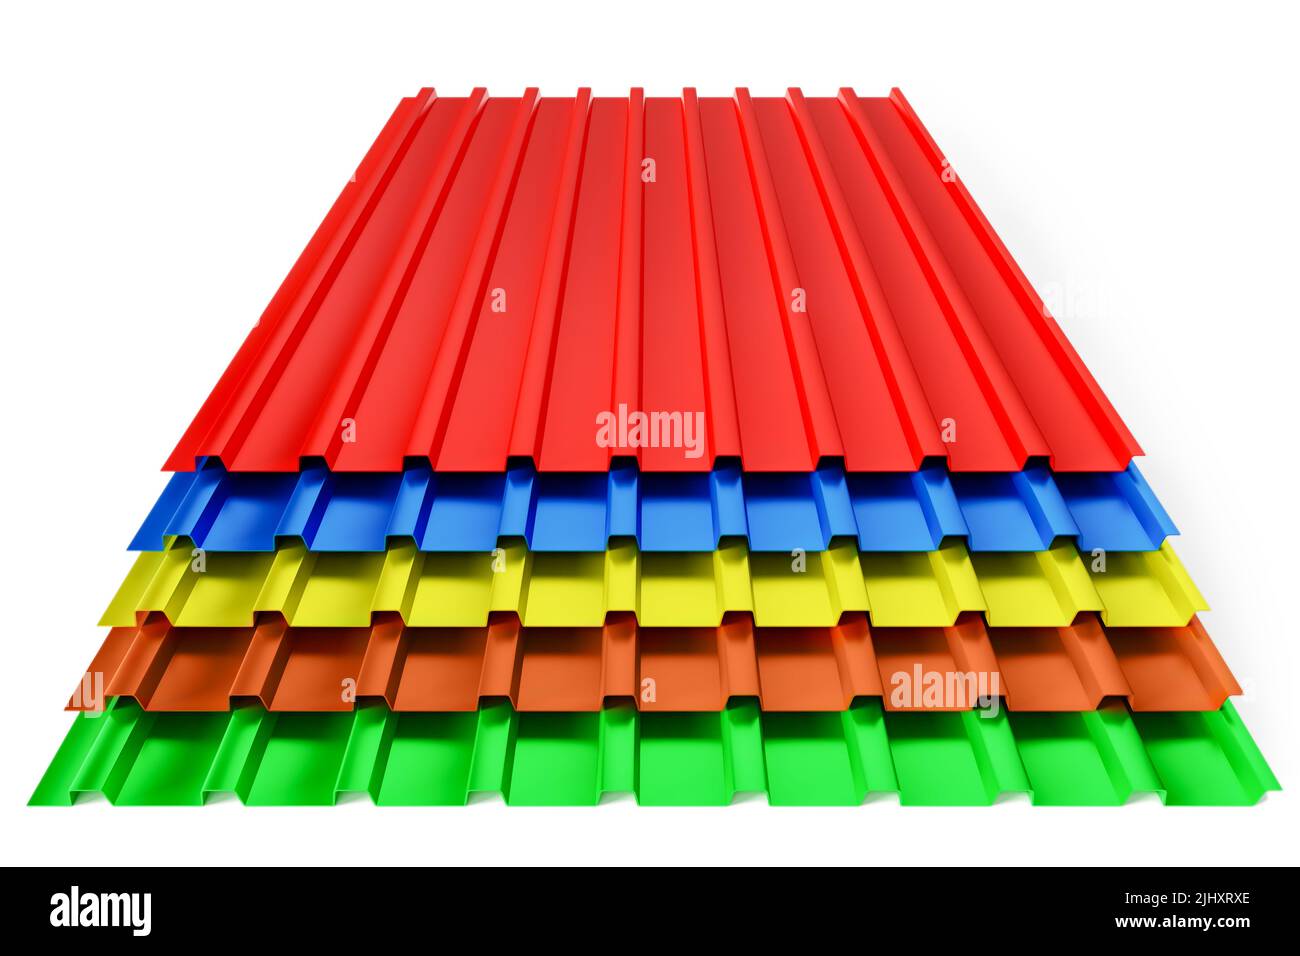 Row of multicolored corrugated metal sheets for roofing on display stand  Stock Photo by aowsakornprapat